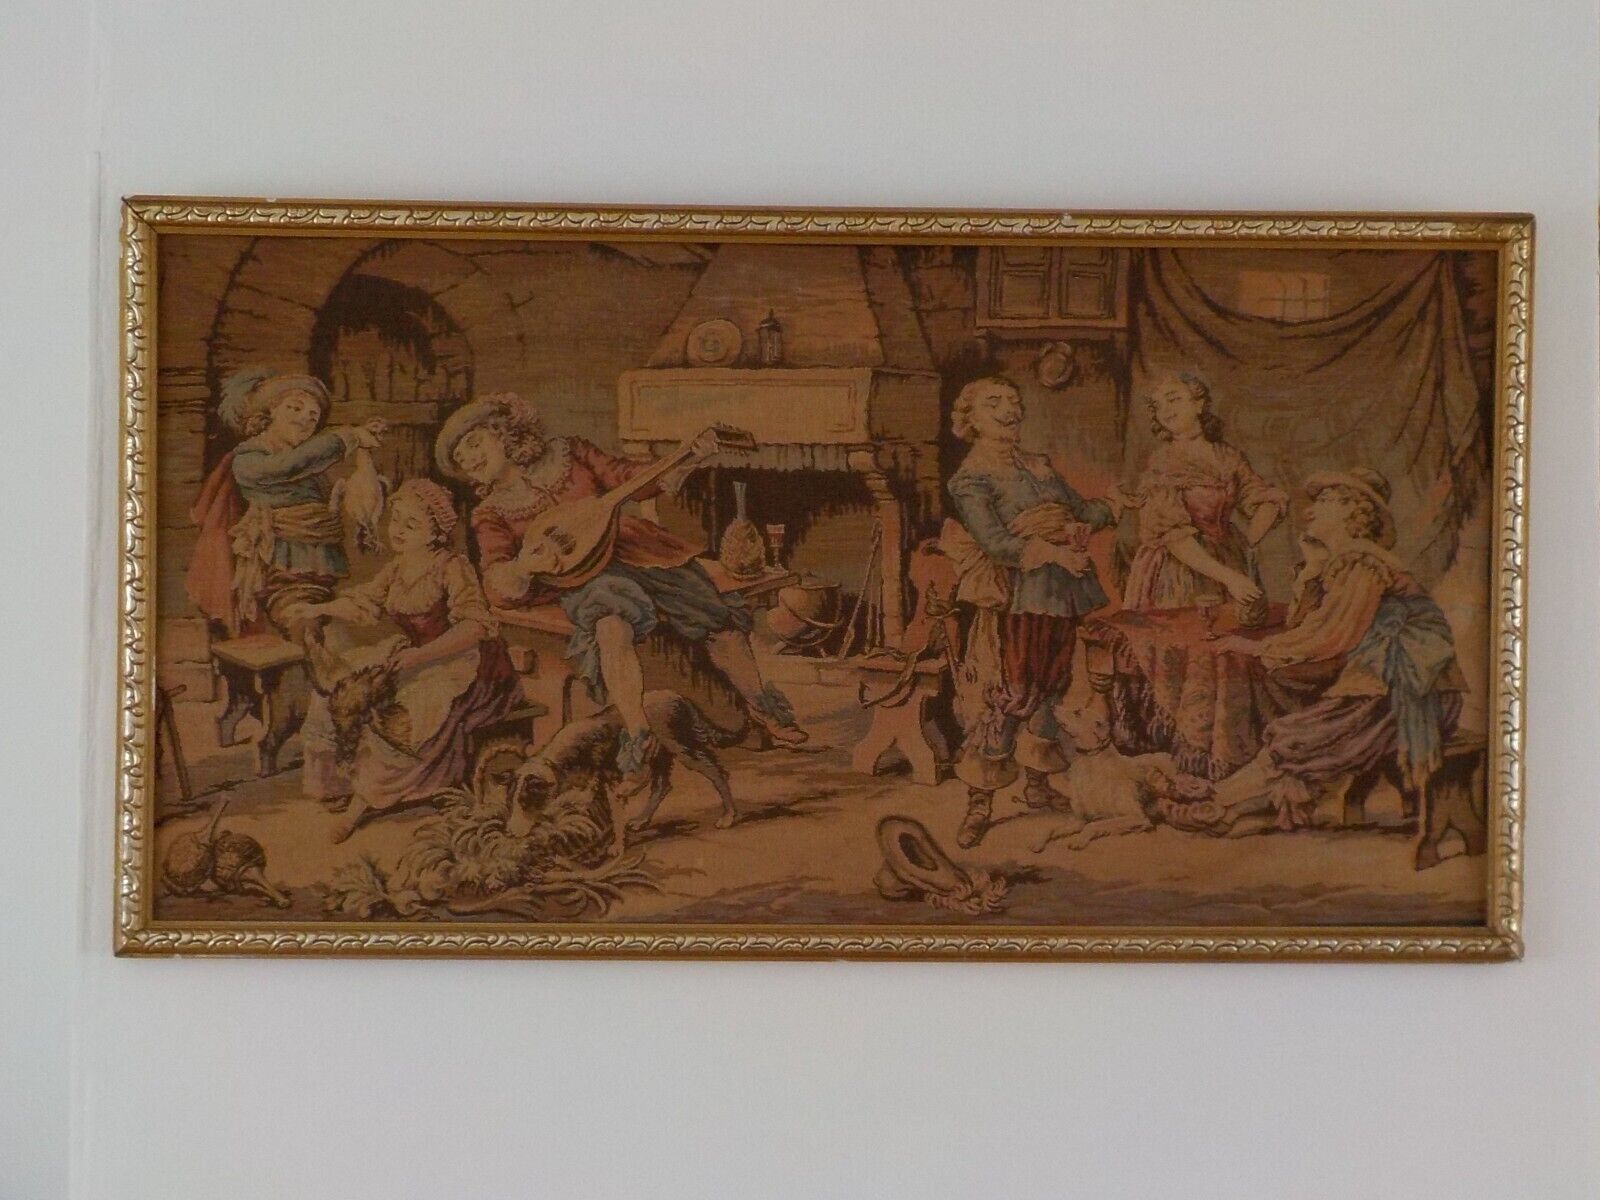 Antique Valuations: Antique Victorian "Tavern Scene" Framed Tapestry